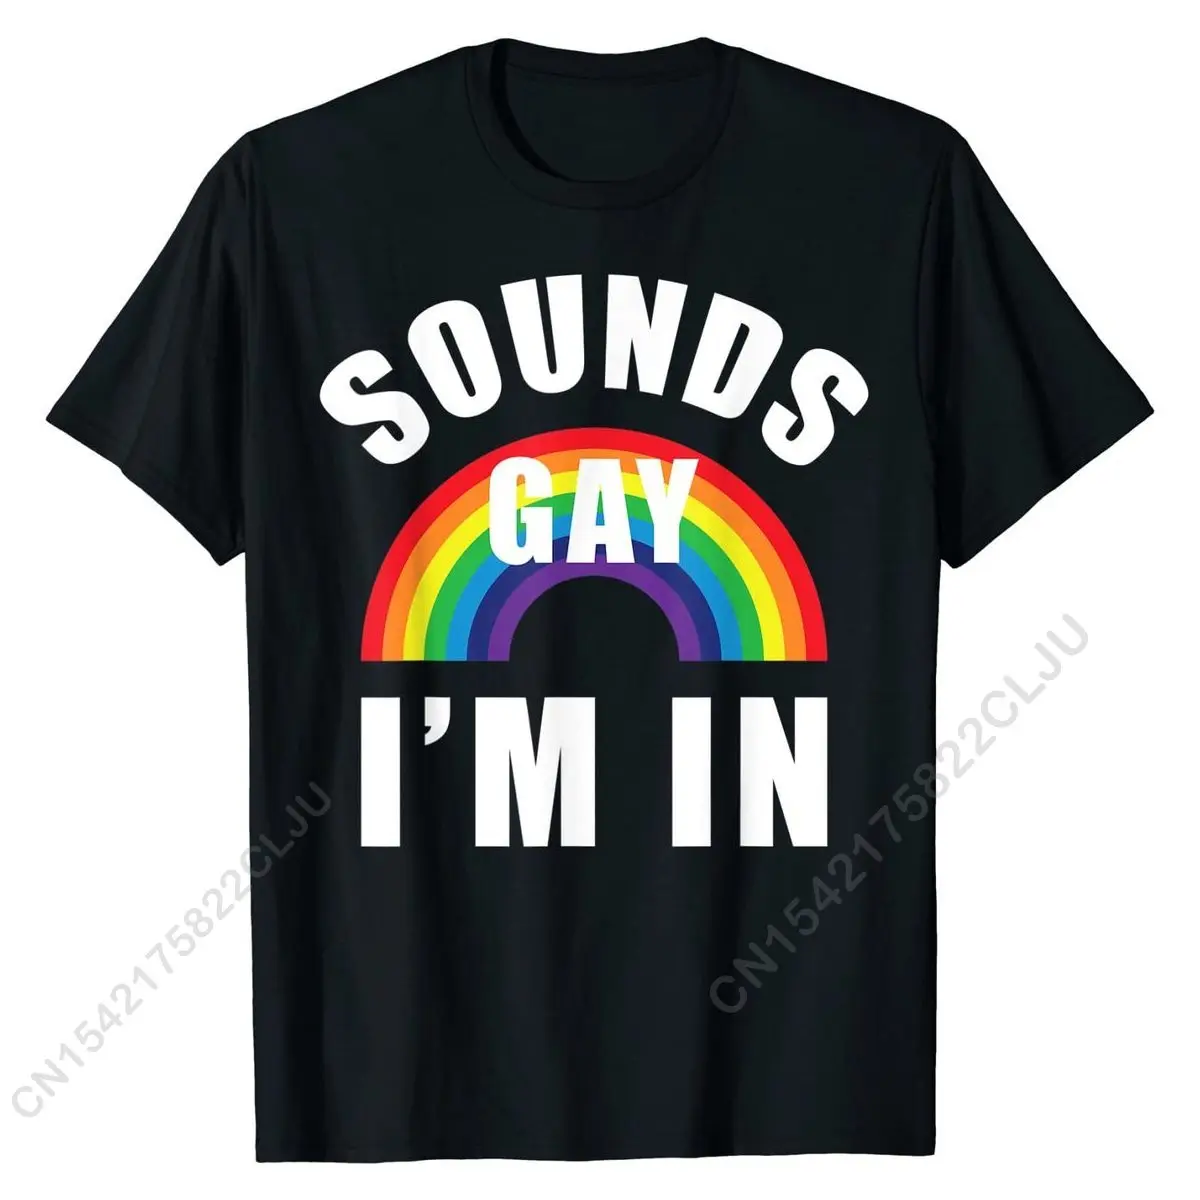 

Sounds Gay Im In Shirt Funny LGBT Gay Lesbian Bisexual T-Shirt CustomCustomized Tops & Tees Slim Fit Cotton Mens T Shirts